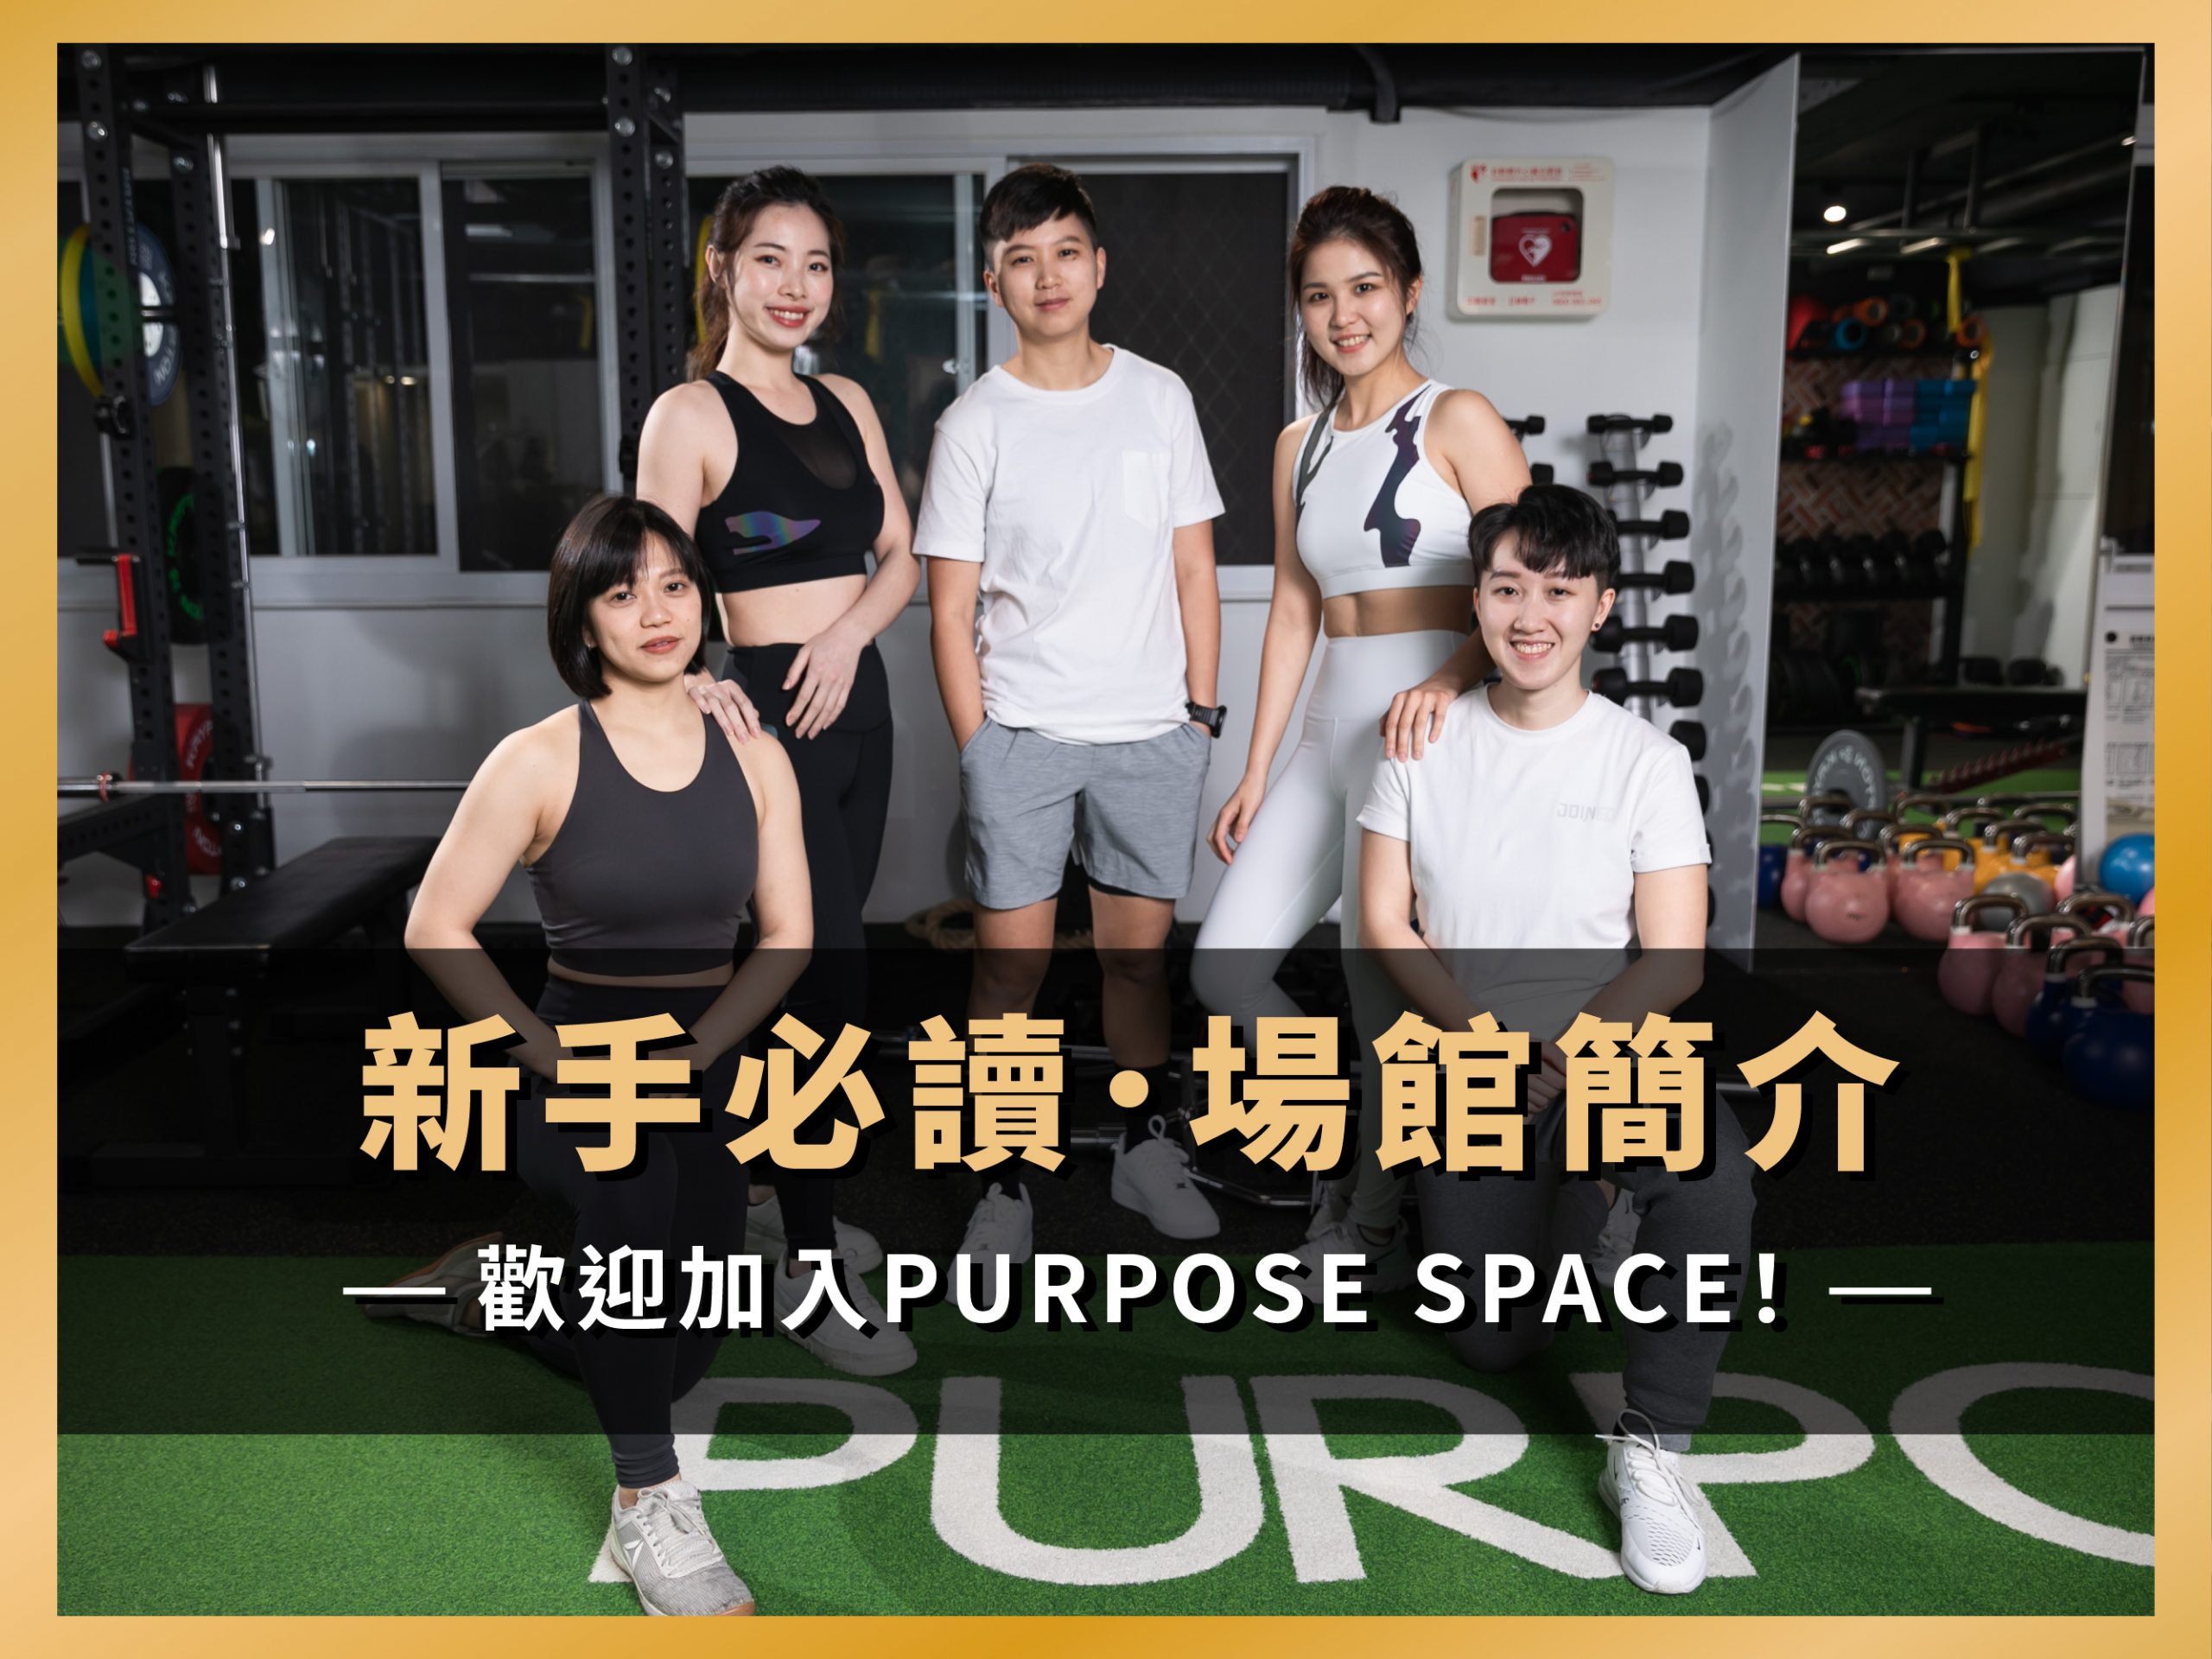 You are currently viewing 歡迎您加入Purpose Space！二館新開幕！